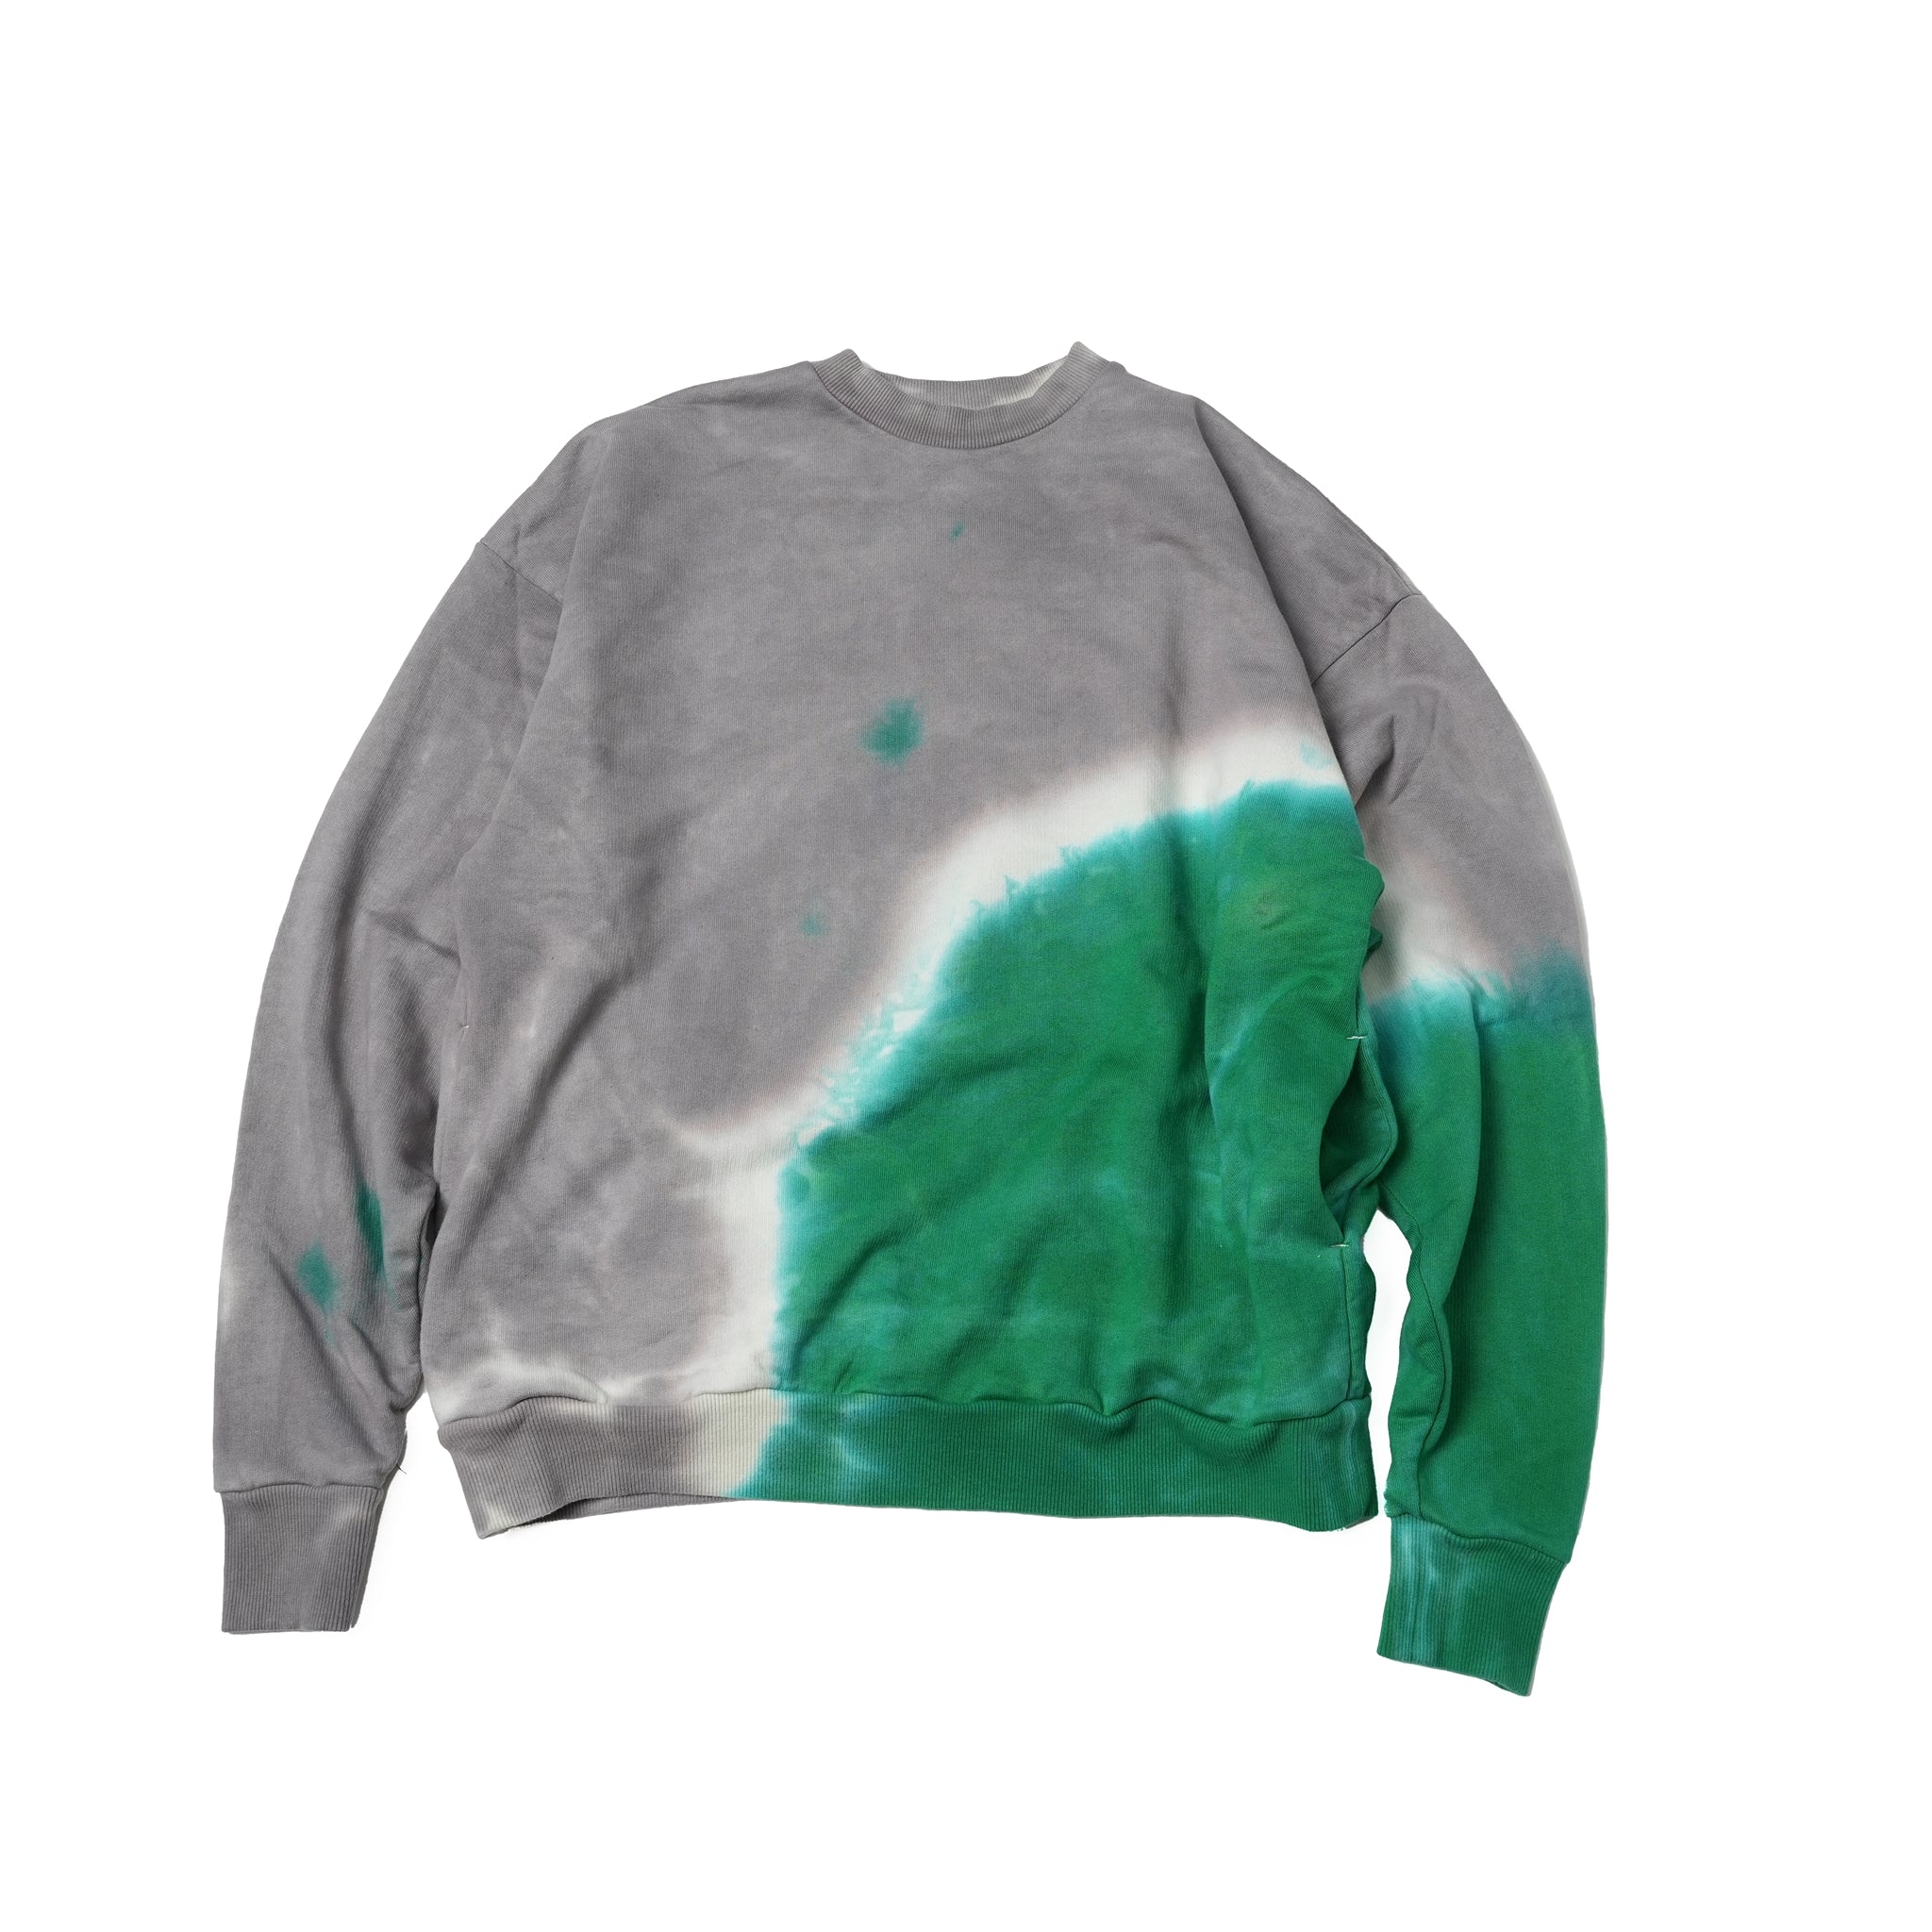 Name:Tiedye Pile Pullover | Color:Mix/Coffee【AMBERGLEAM_アンバーグリーム】| No:1143131111